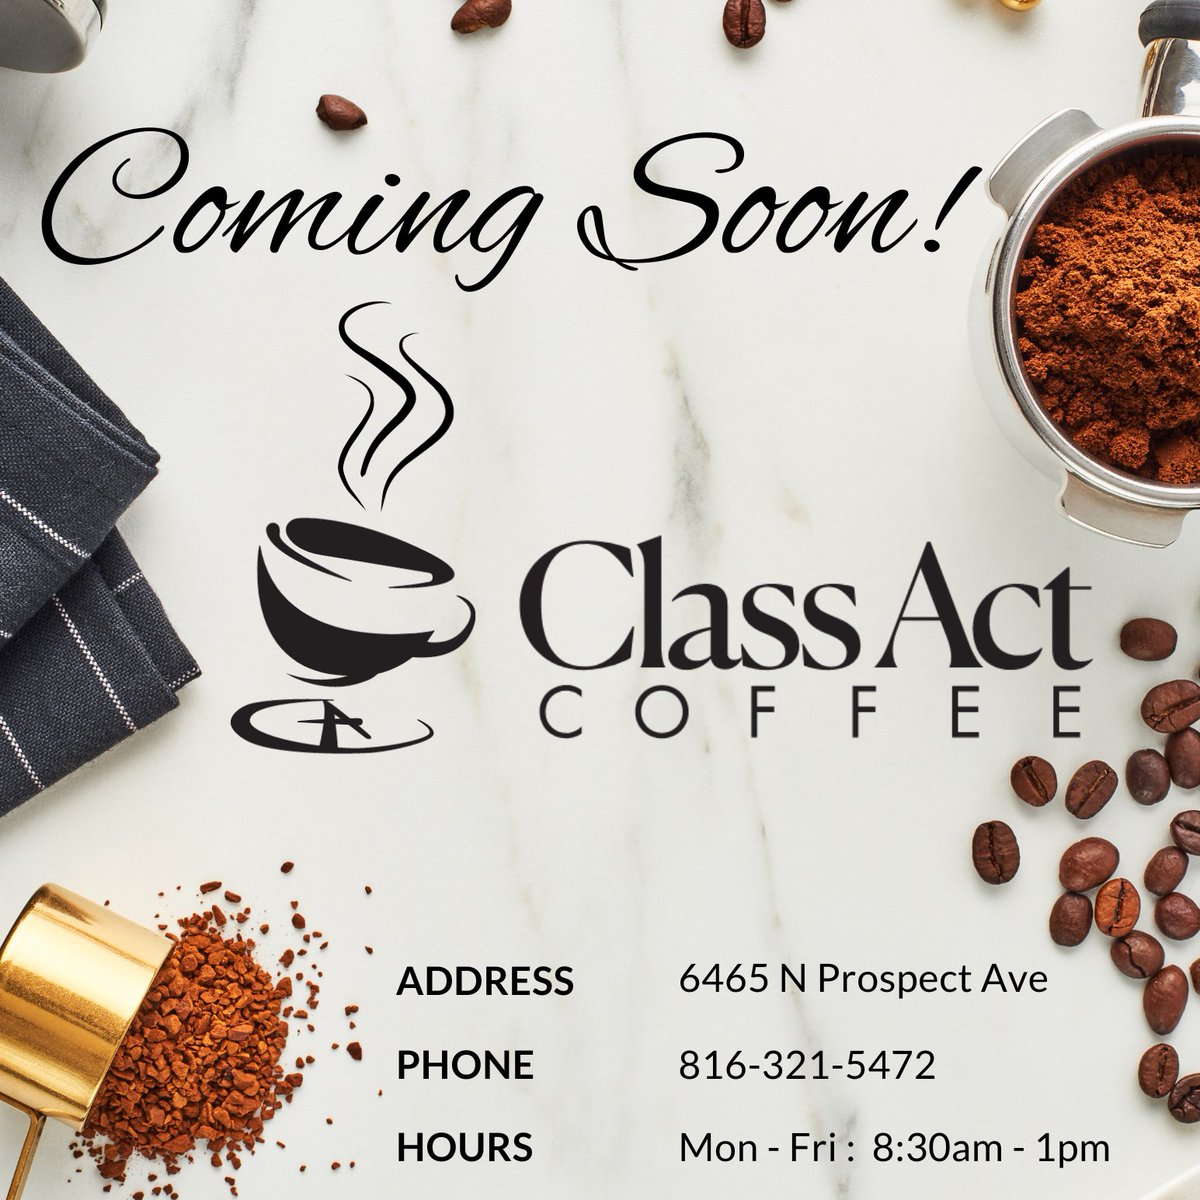 See you soon! ☕
Can't wait to welcome you and show off all we have been working on. 
#studentrun #studentrunbusiness #realworldlearning